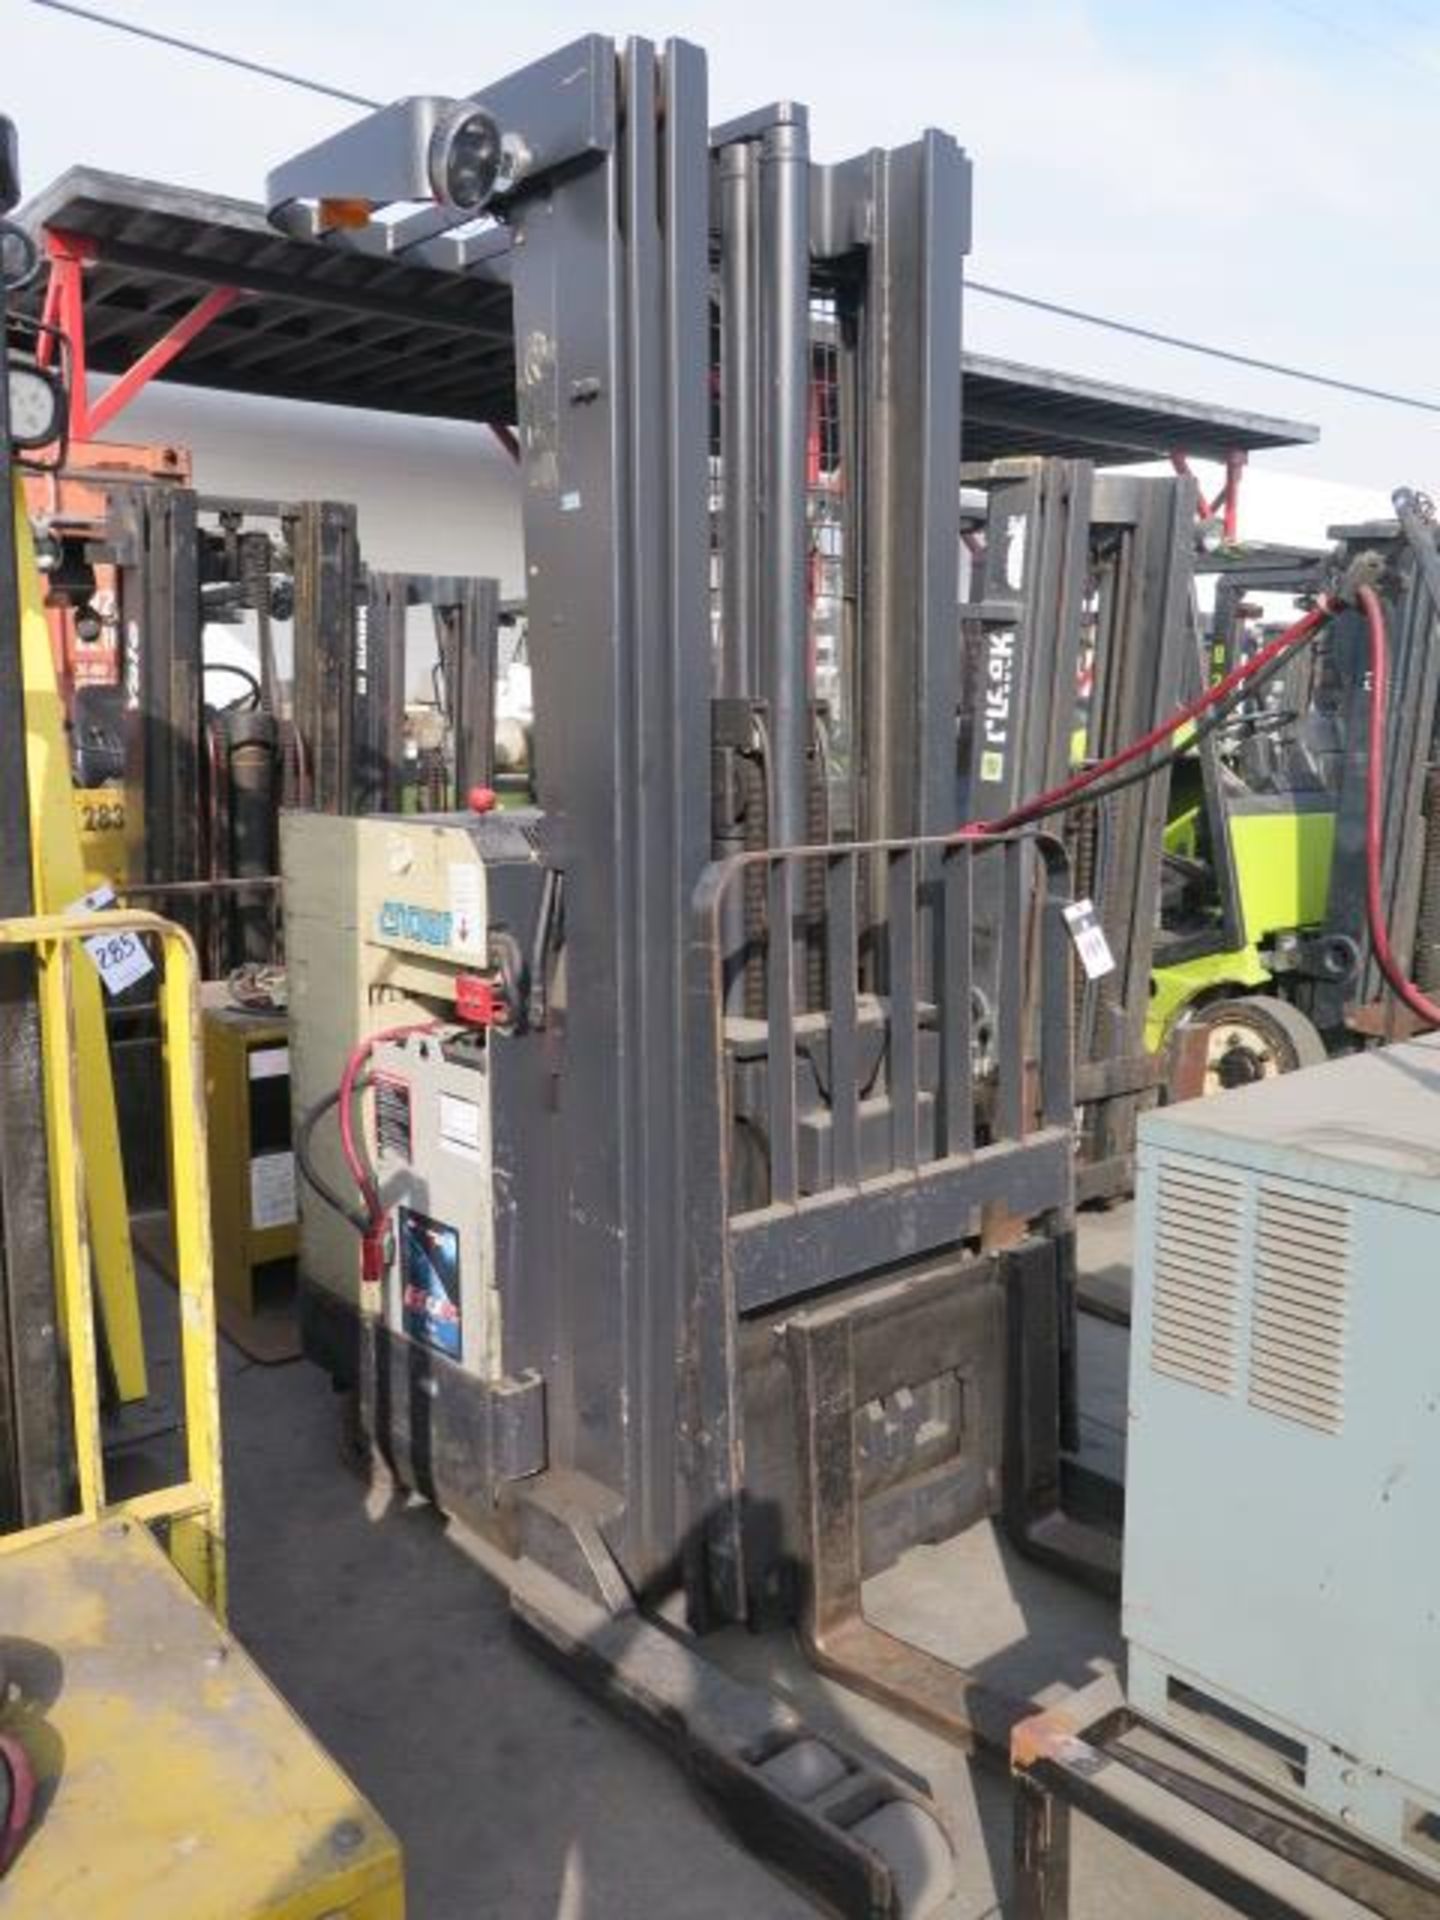 Crown 35RRTT 3500 Lb Cap Electric Forklift s/n W-93179 w/ 3-Stage Mast, 210” Lift Height, Cushion - Image 2 of 8